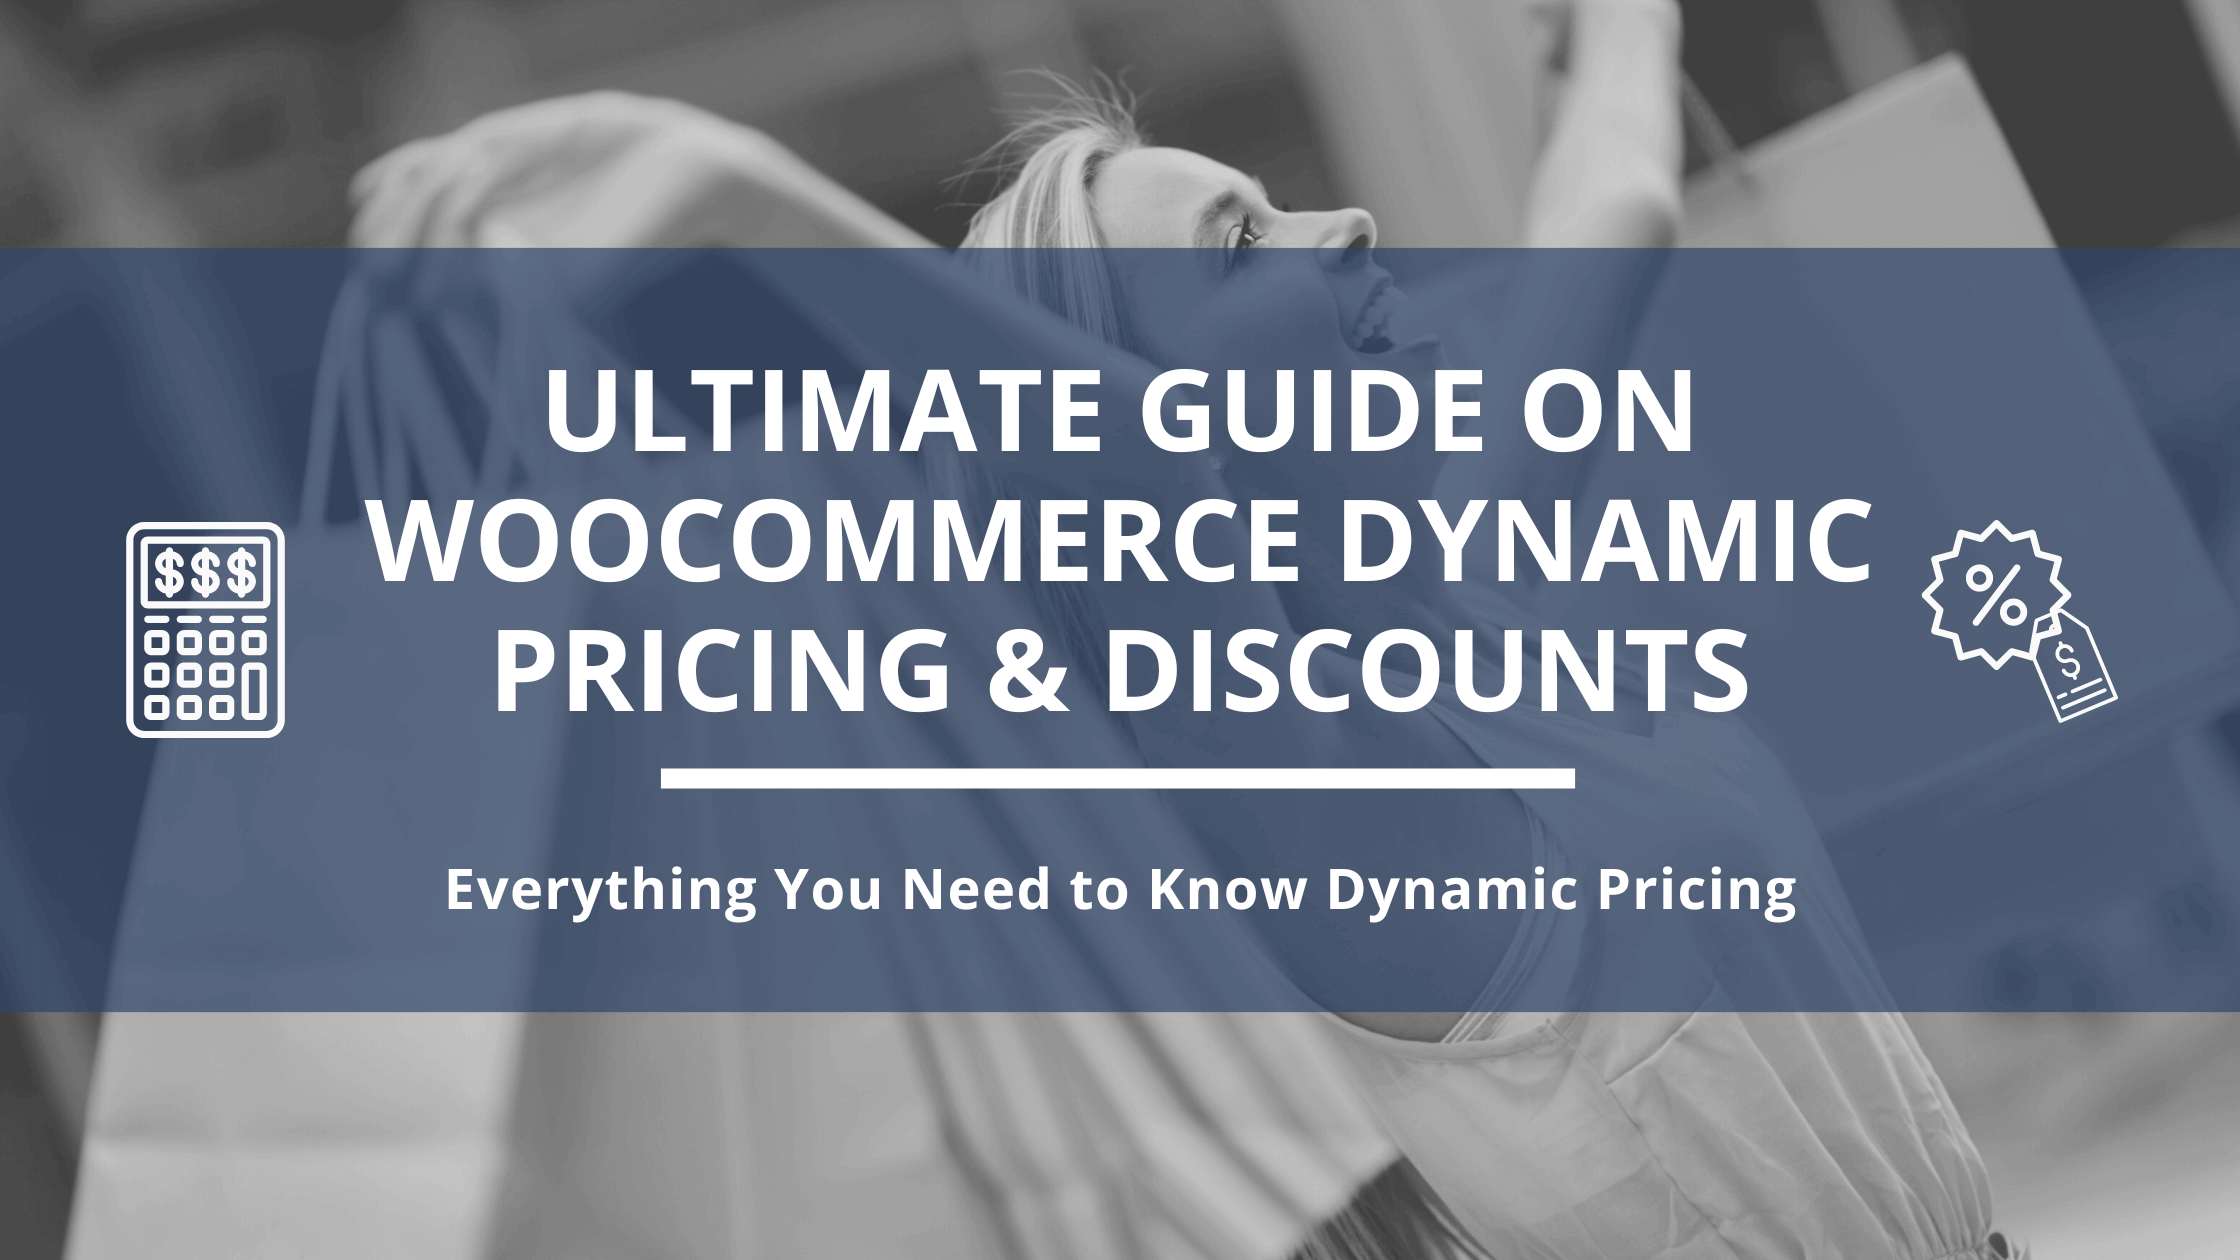 WooCommerce Dynamic Pricing and discounts